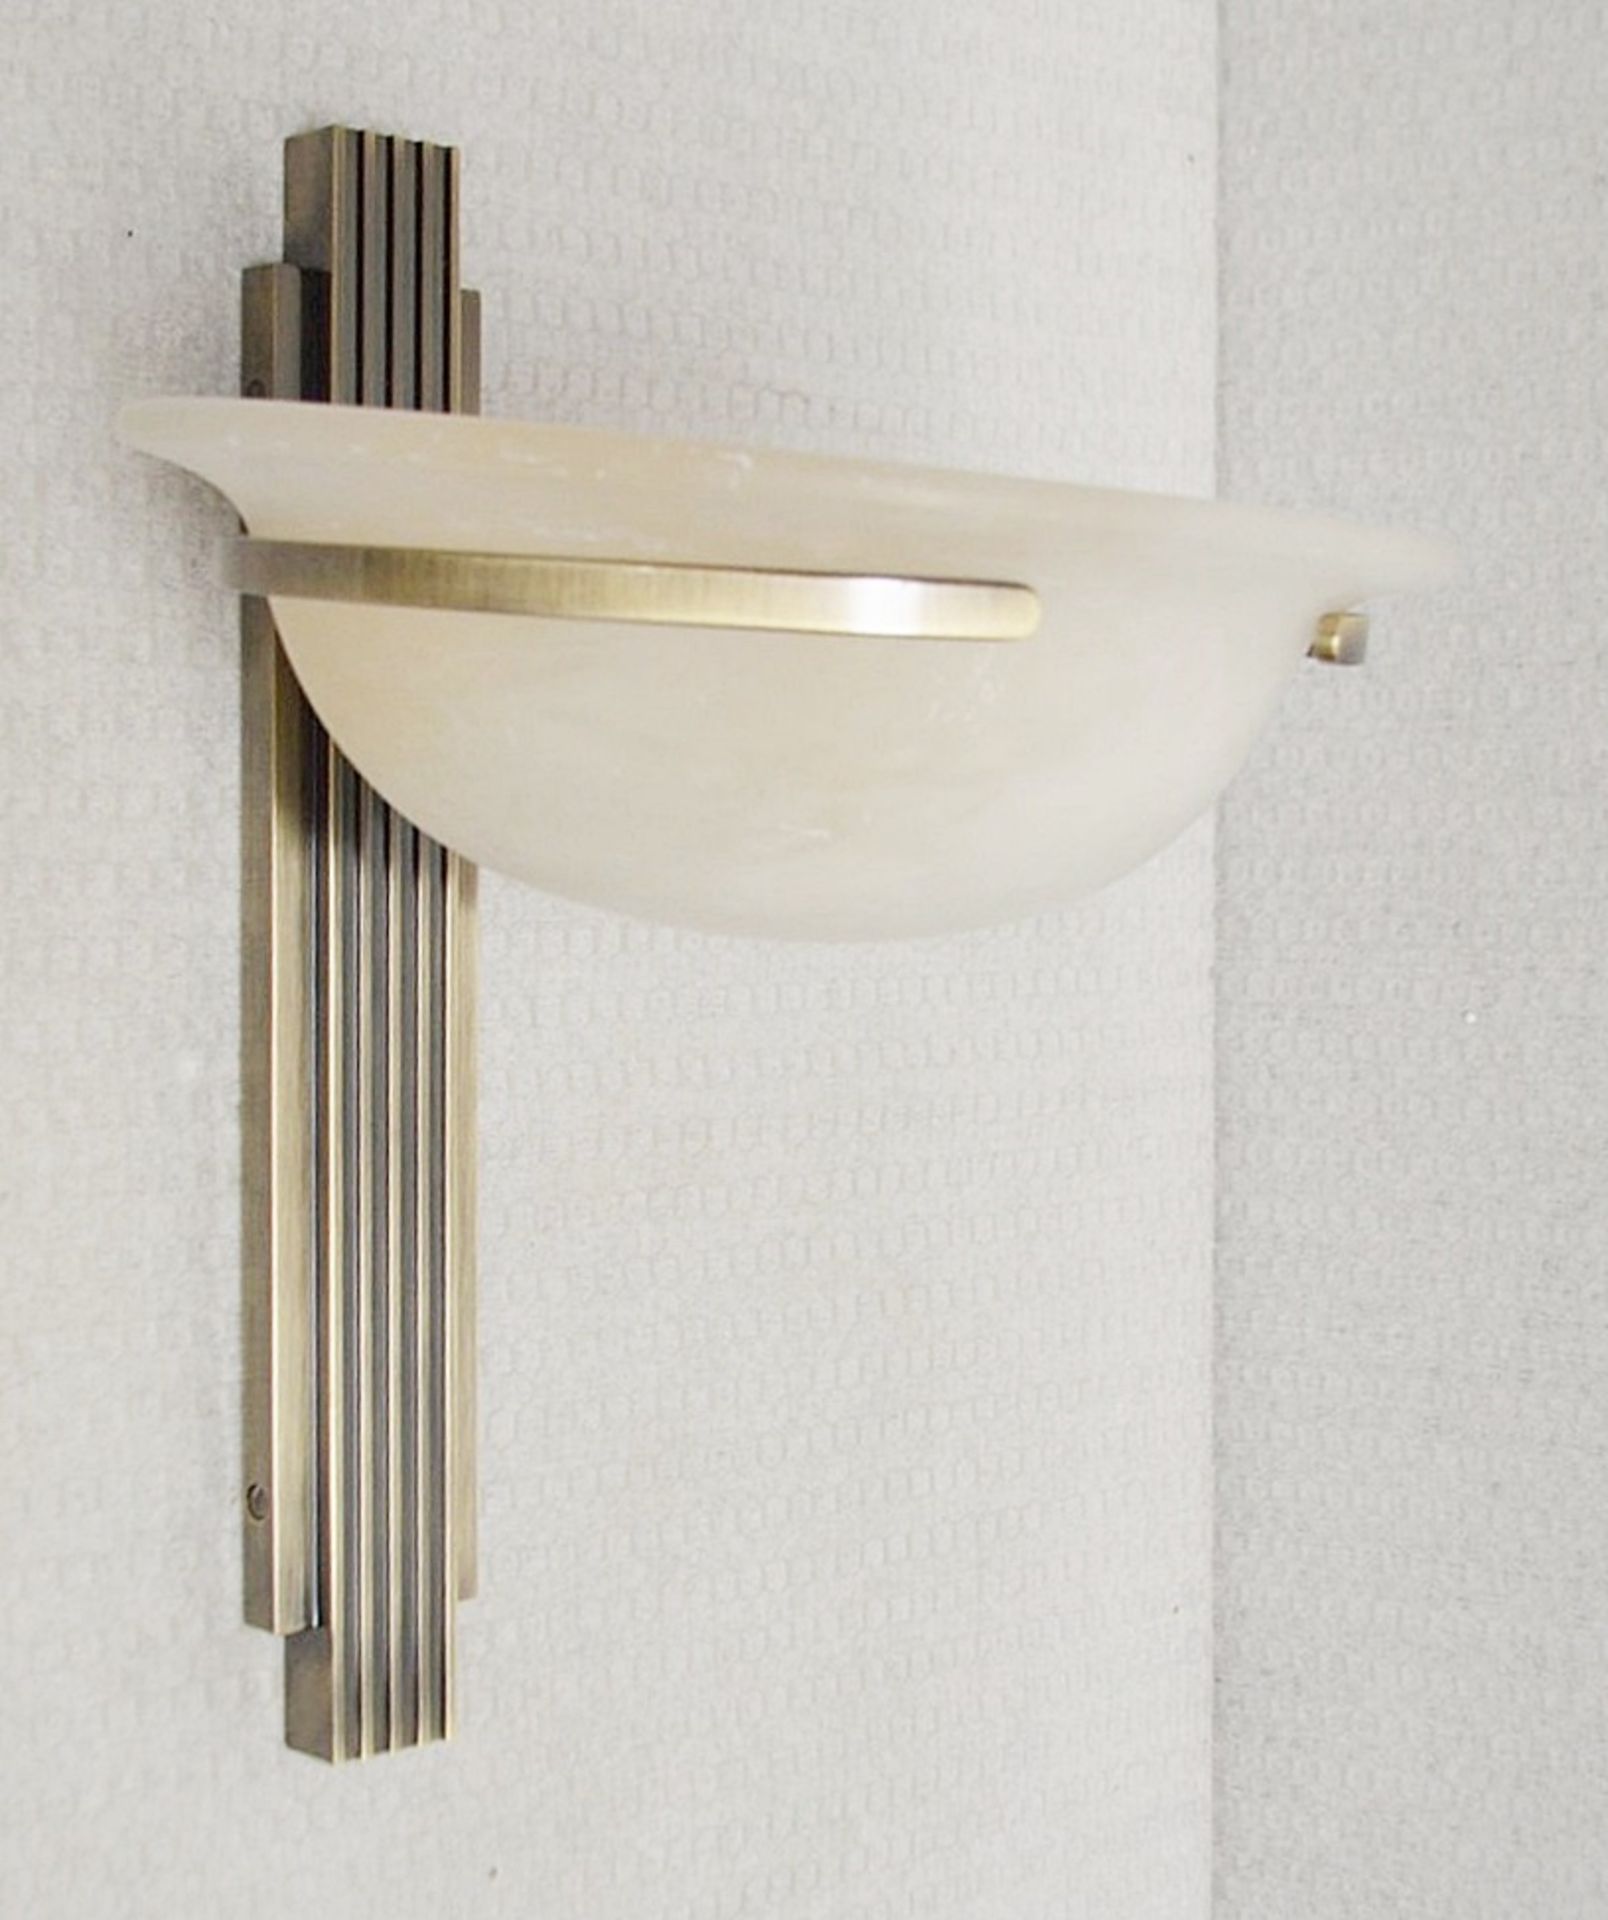 1 x CHELSOM Art Deco Wall Light Fitting Featuring An Alabaster Glass Shade And Antique Brass